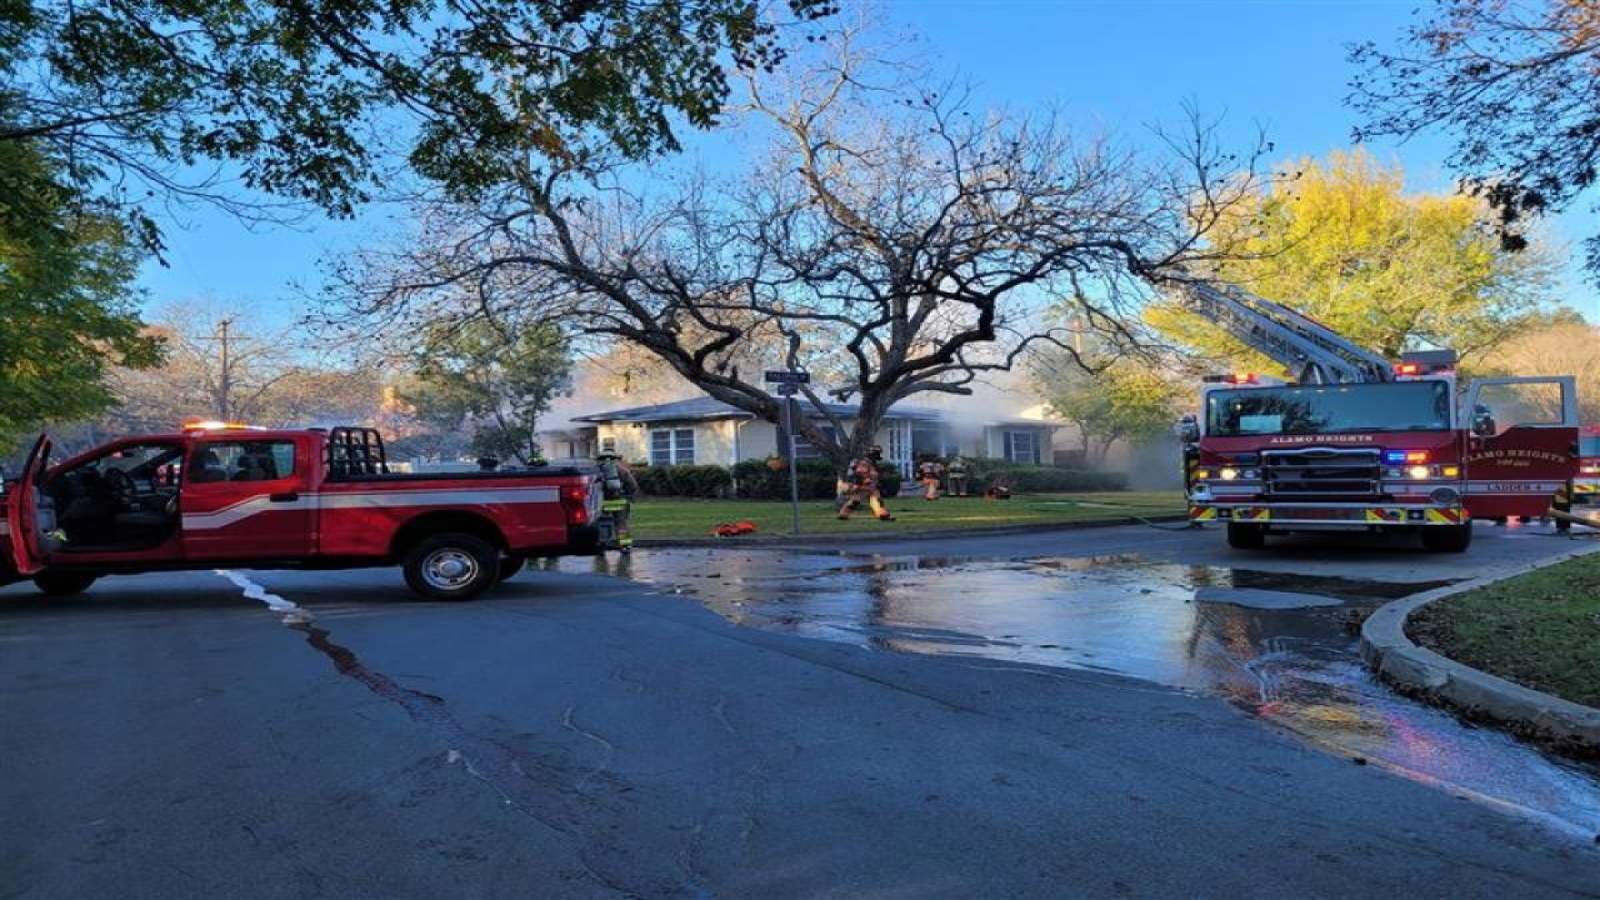 Ammunition goes off as firefighters respond to house fire in Olmos Park